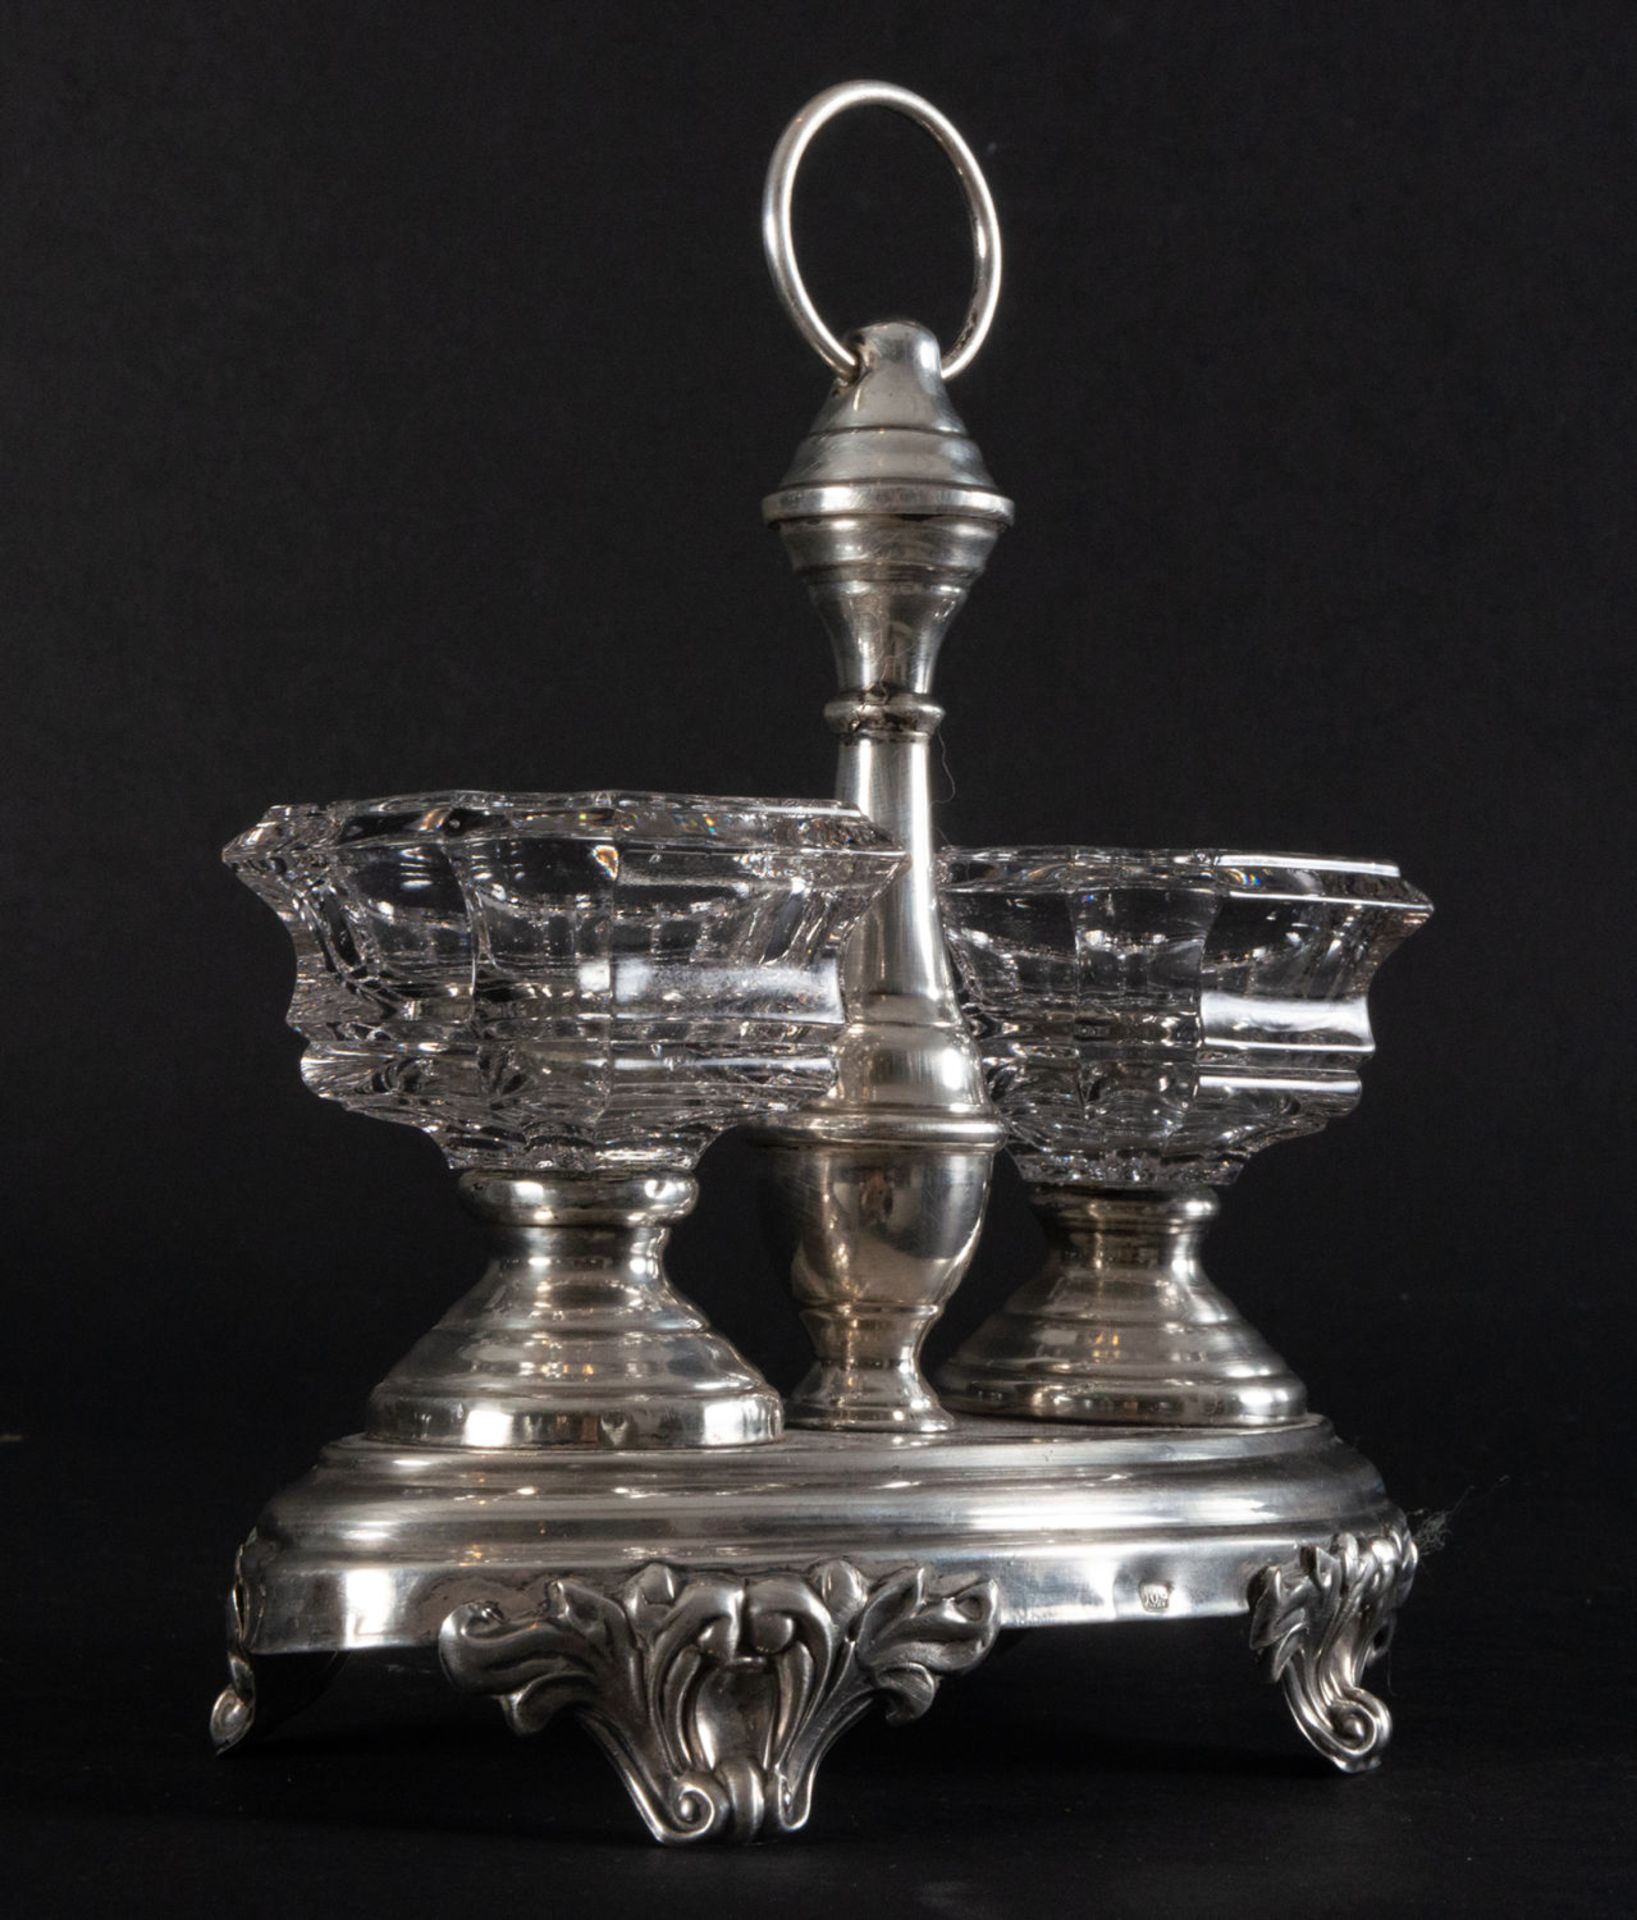 Silver and glass spice rack in sterling silver, 19th century